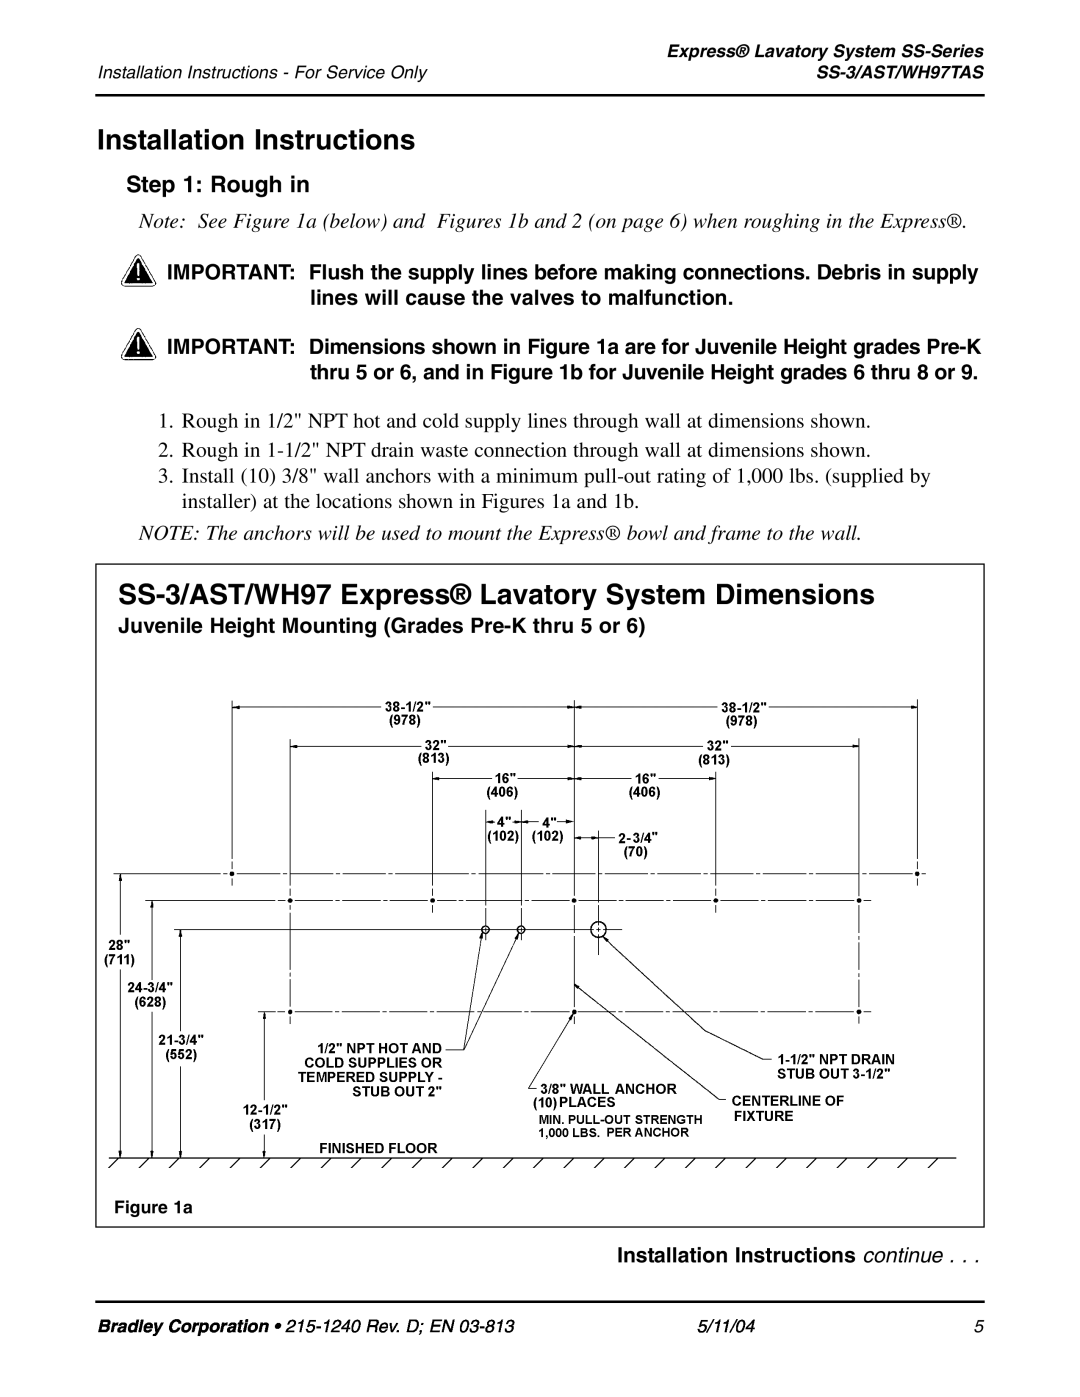 Bradley Smoker Installation Instructions, SS-3/AST/WH97 Express Lavatory System Dimensions, Rough in 